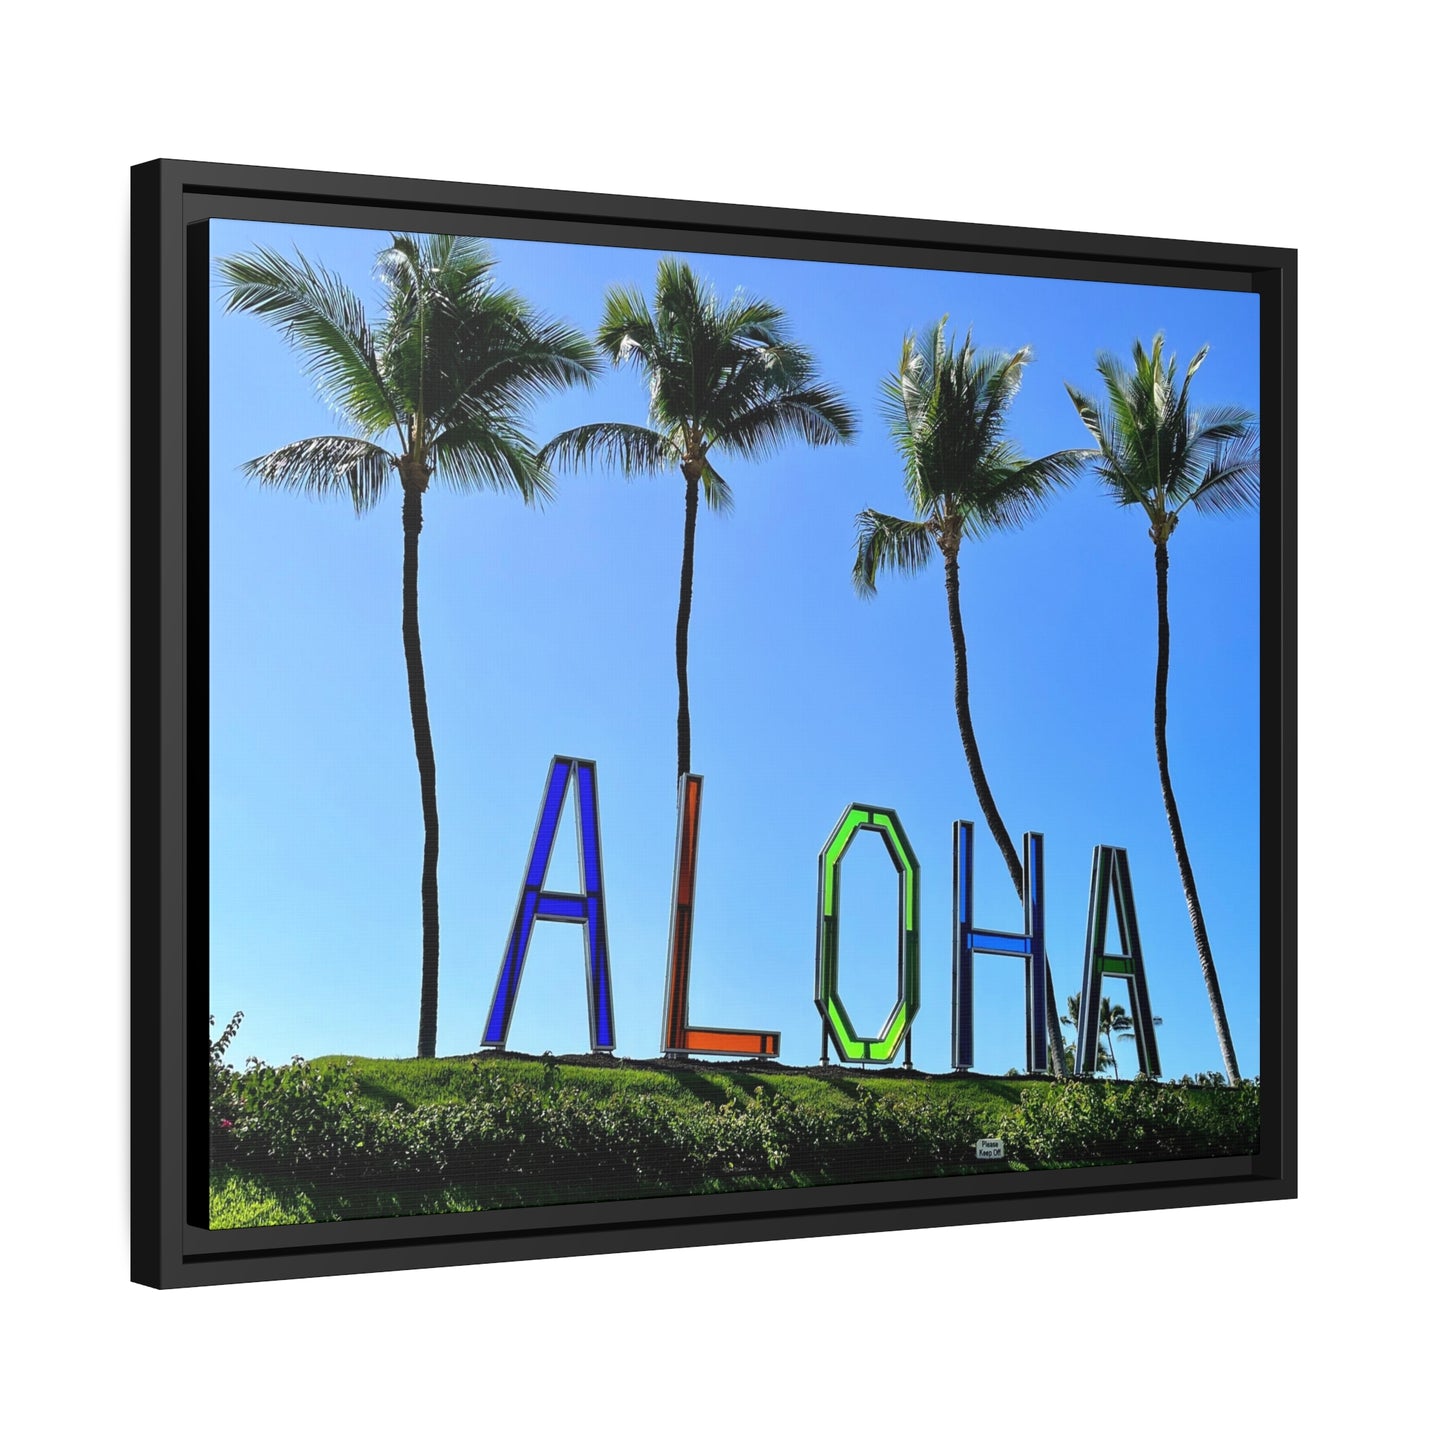 Aloha in Hawaii Matte Canvas Poster, Black Frame*